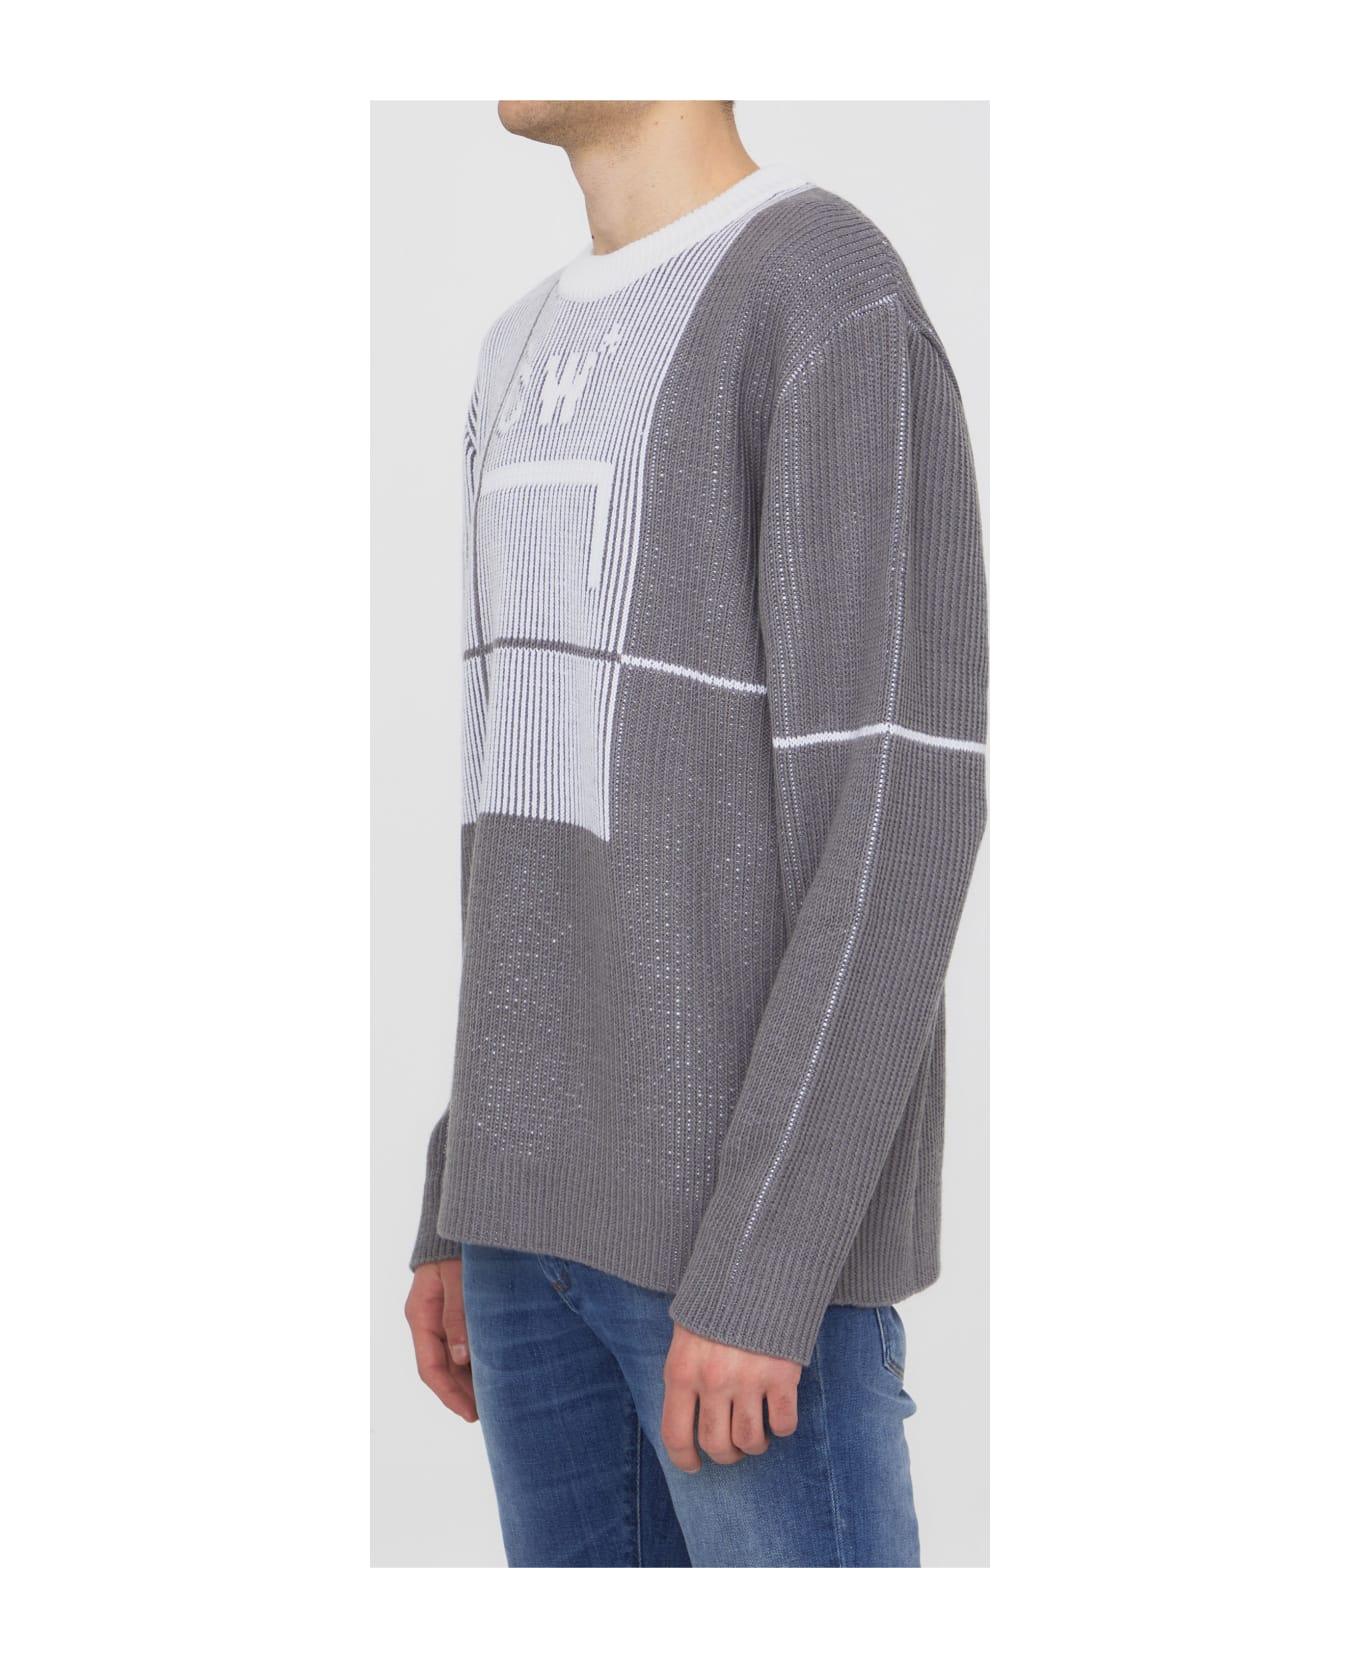 A-COLD-WALL Grid Sweater - GREY